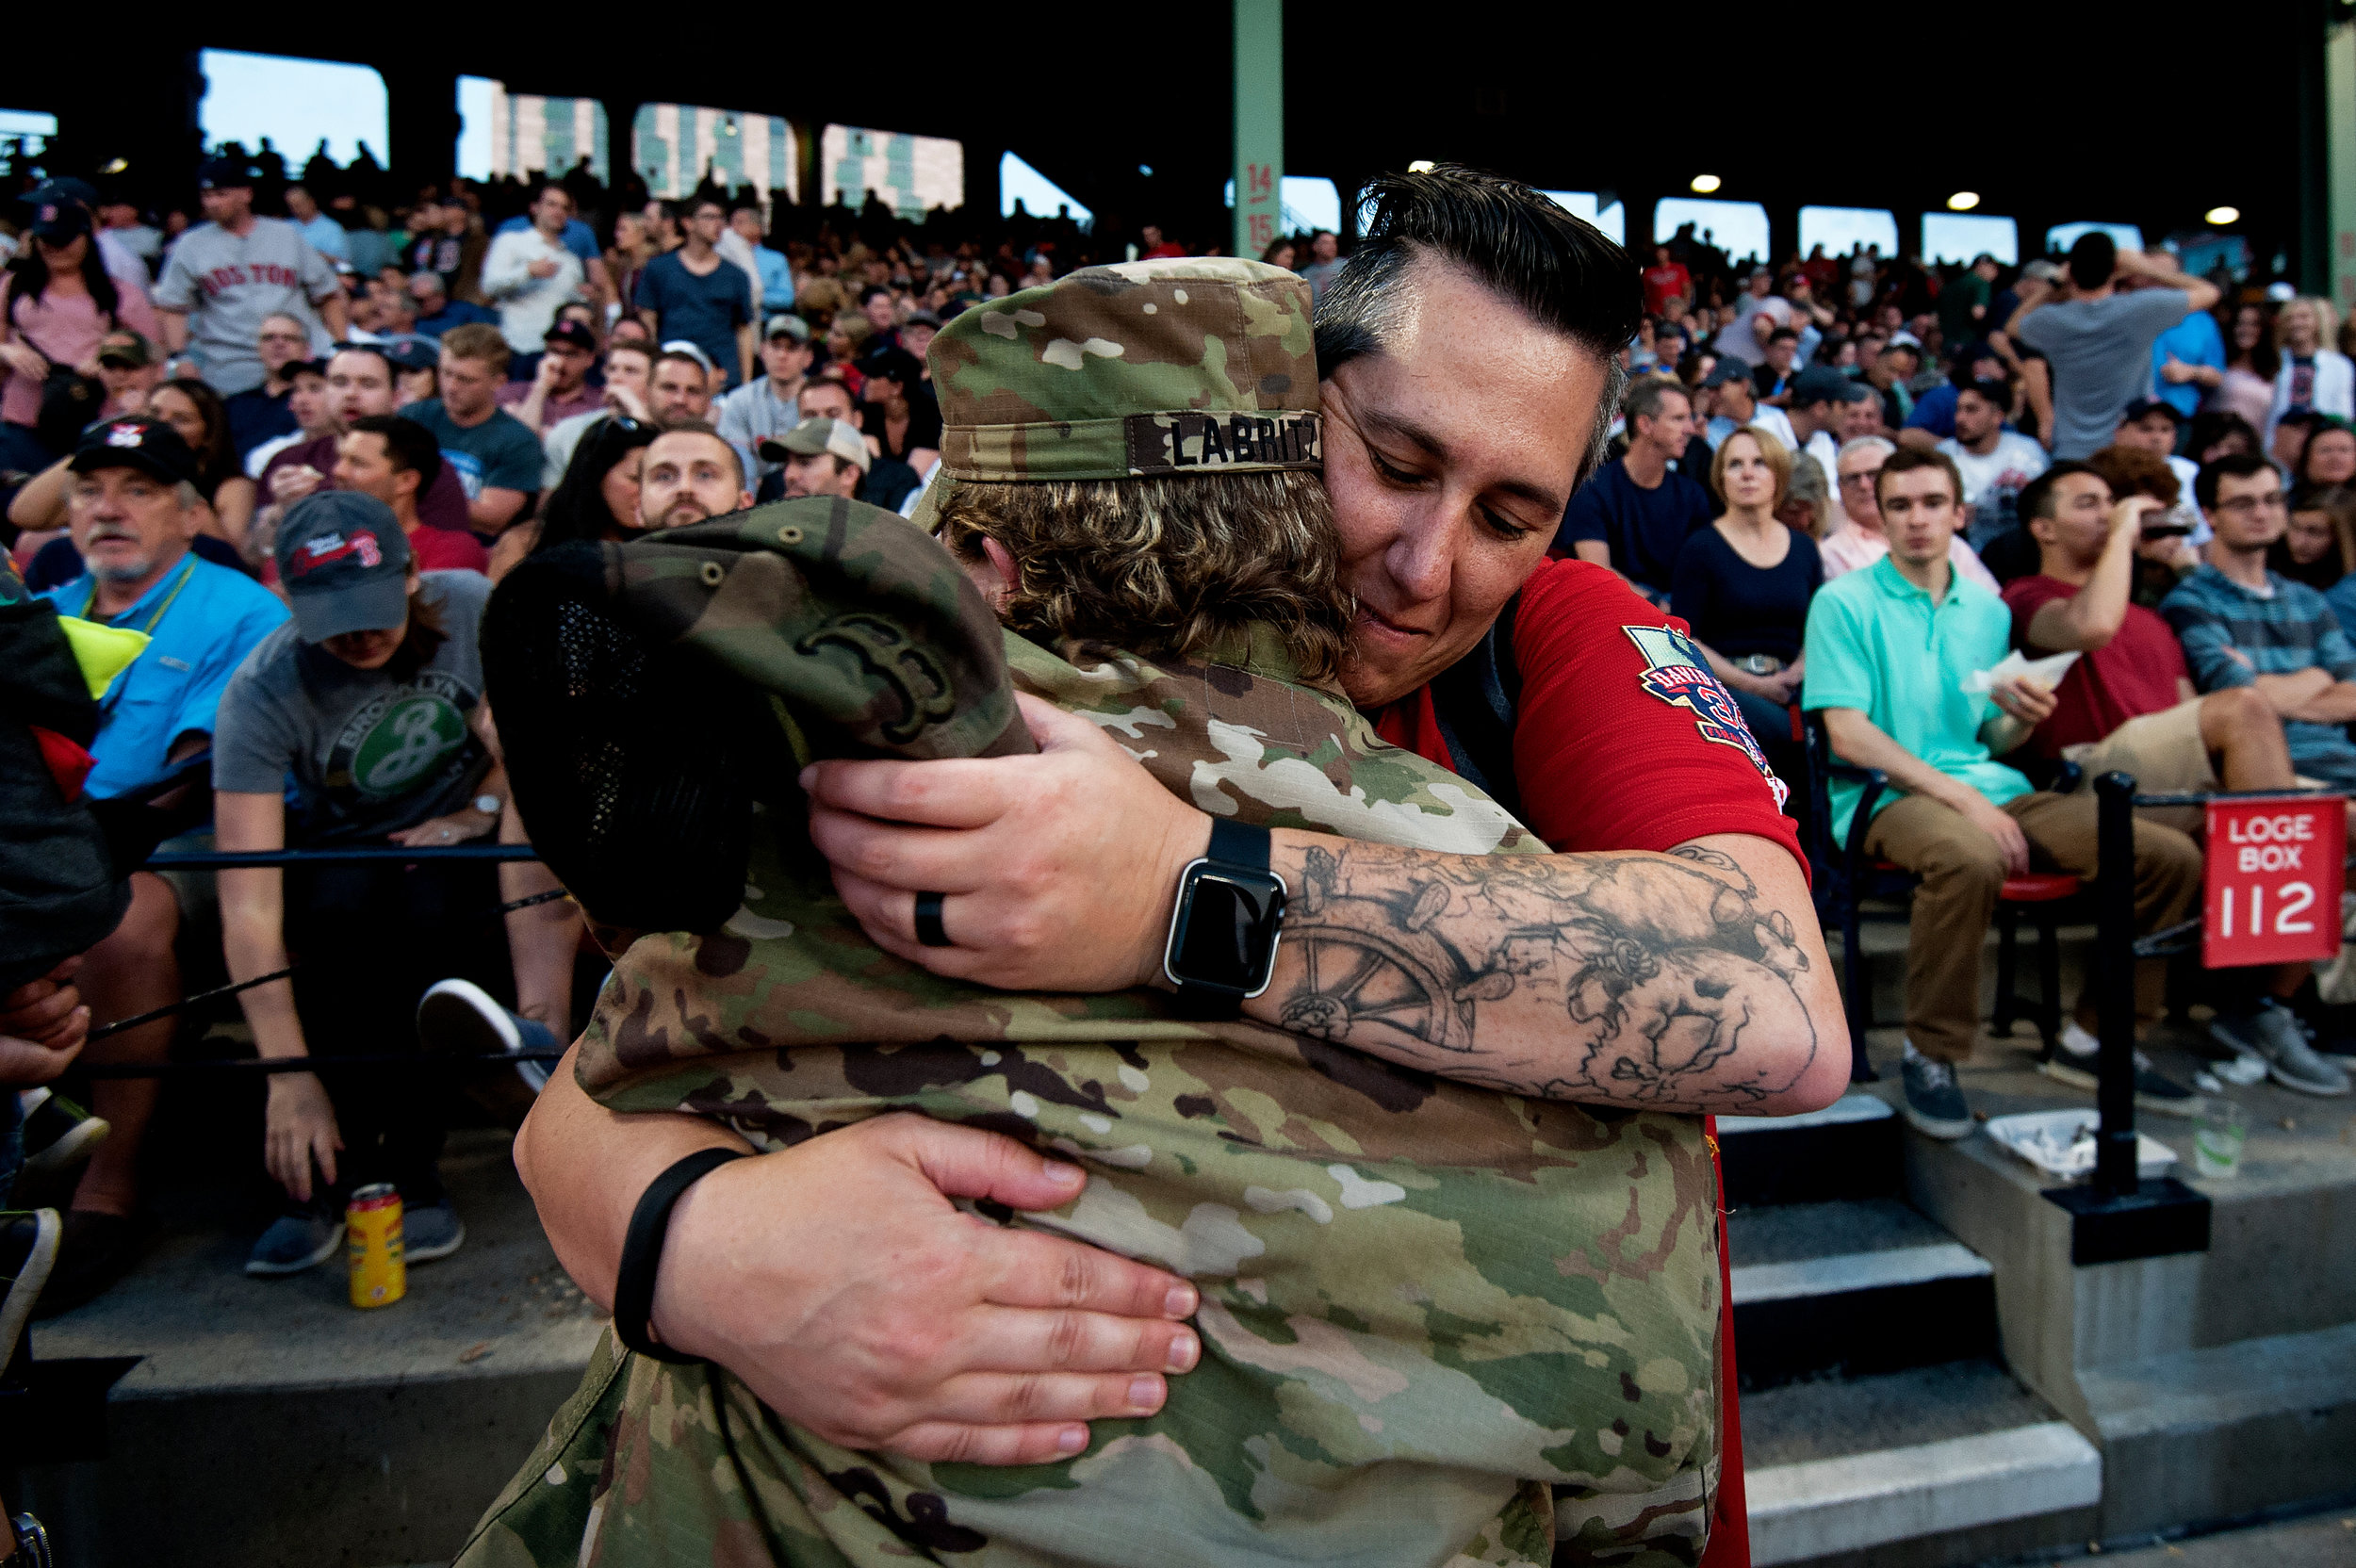  A fan hugs a servicewoman who was honored during Fenway’s Hats Off to Heroes ceremony in the fourth inning of the game against the Chicago White Sox in Boston, Massachusetts on Friday, June 8, 2018. 